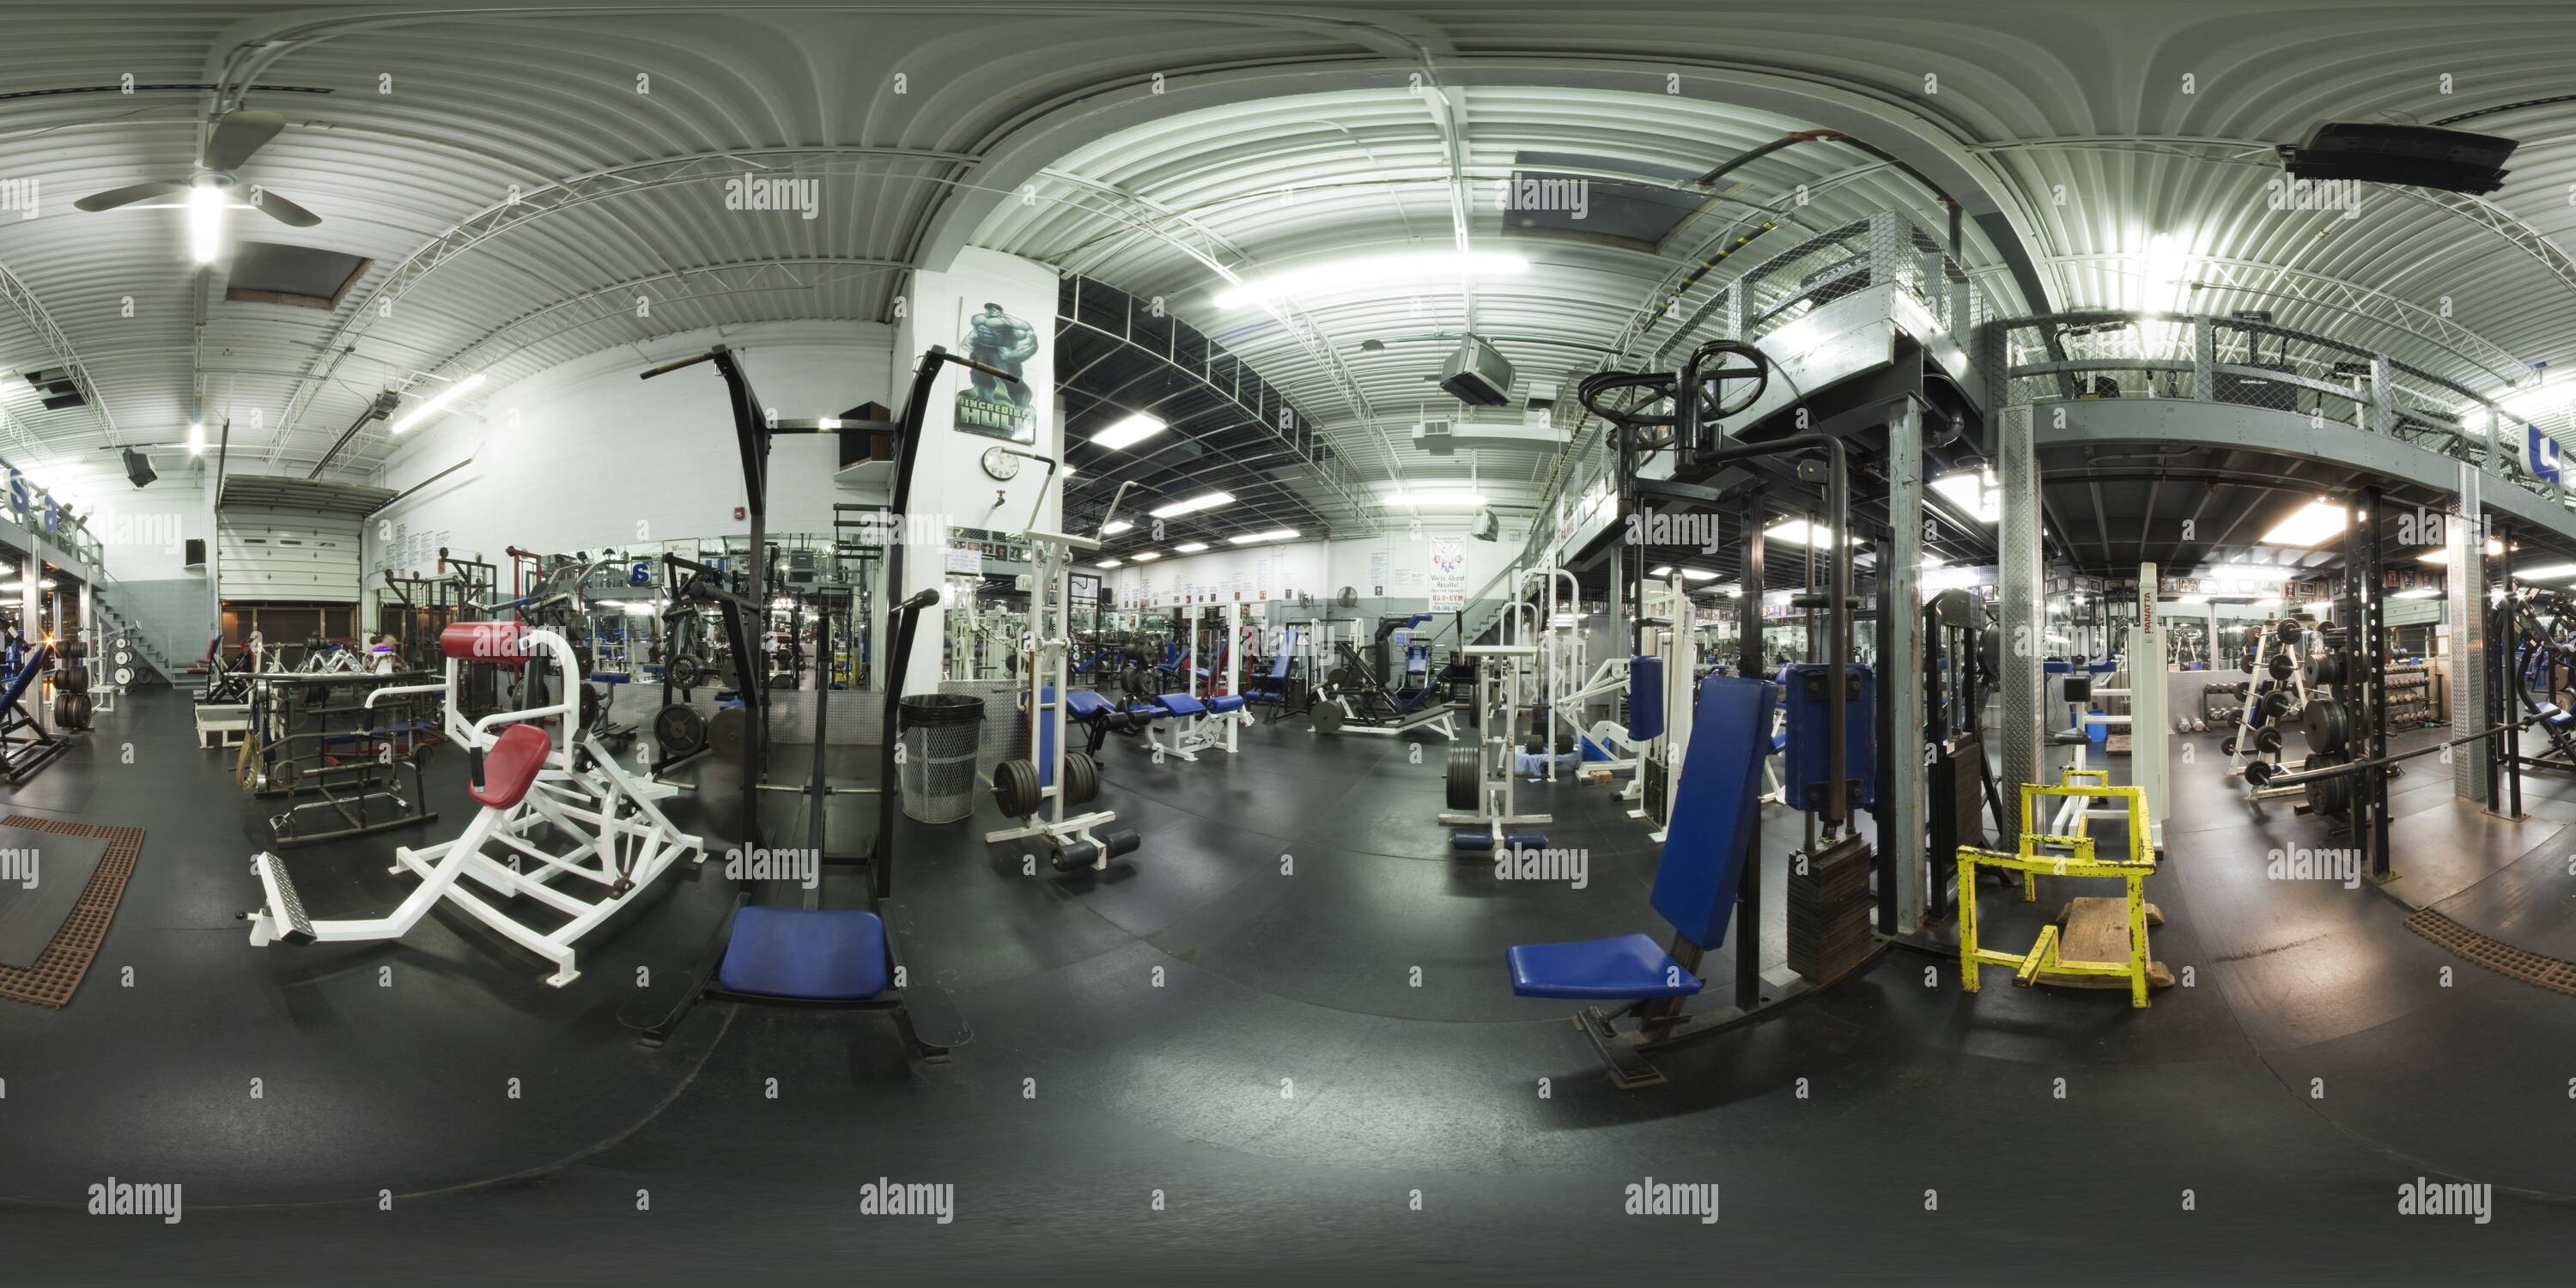 360 degree panoramic view of USA Gym, Bridgeview IL - a real Hardcore gym